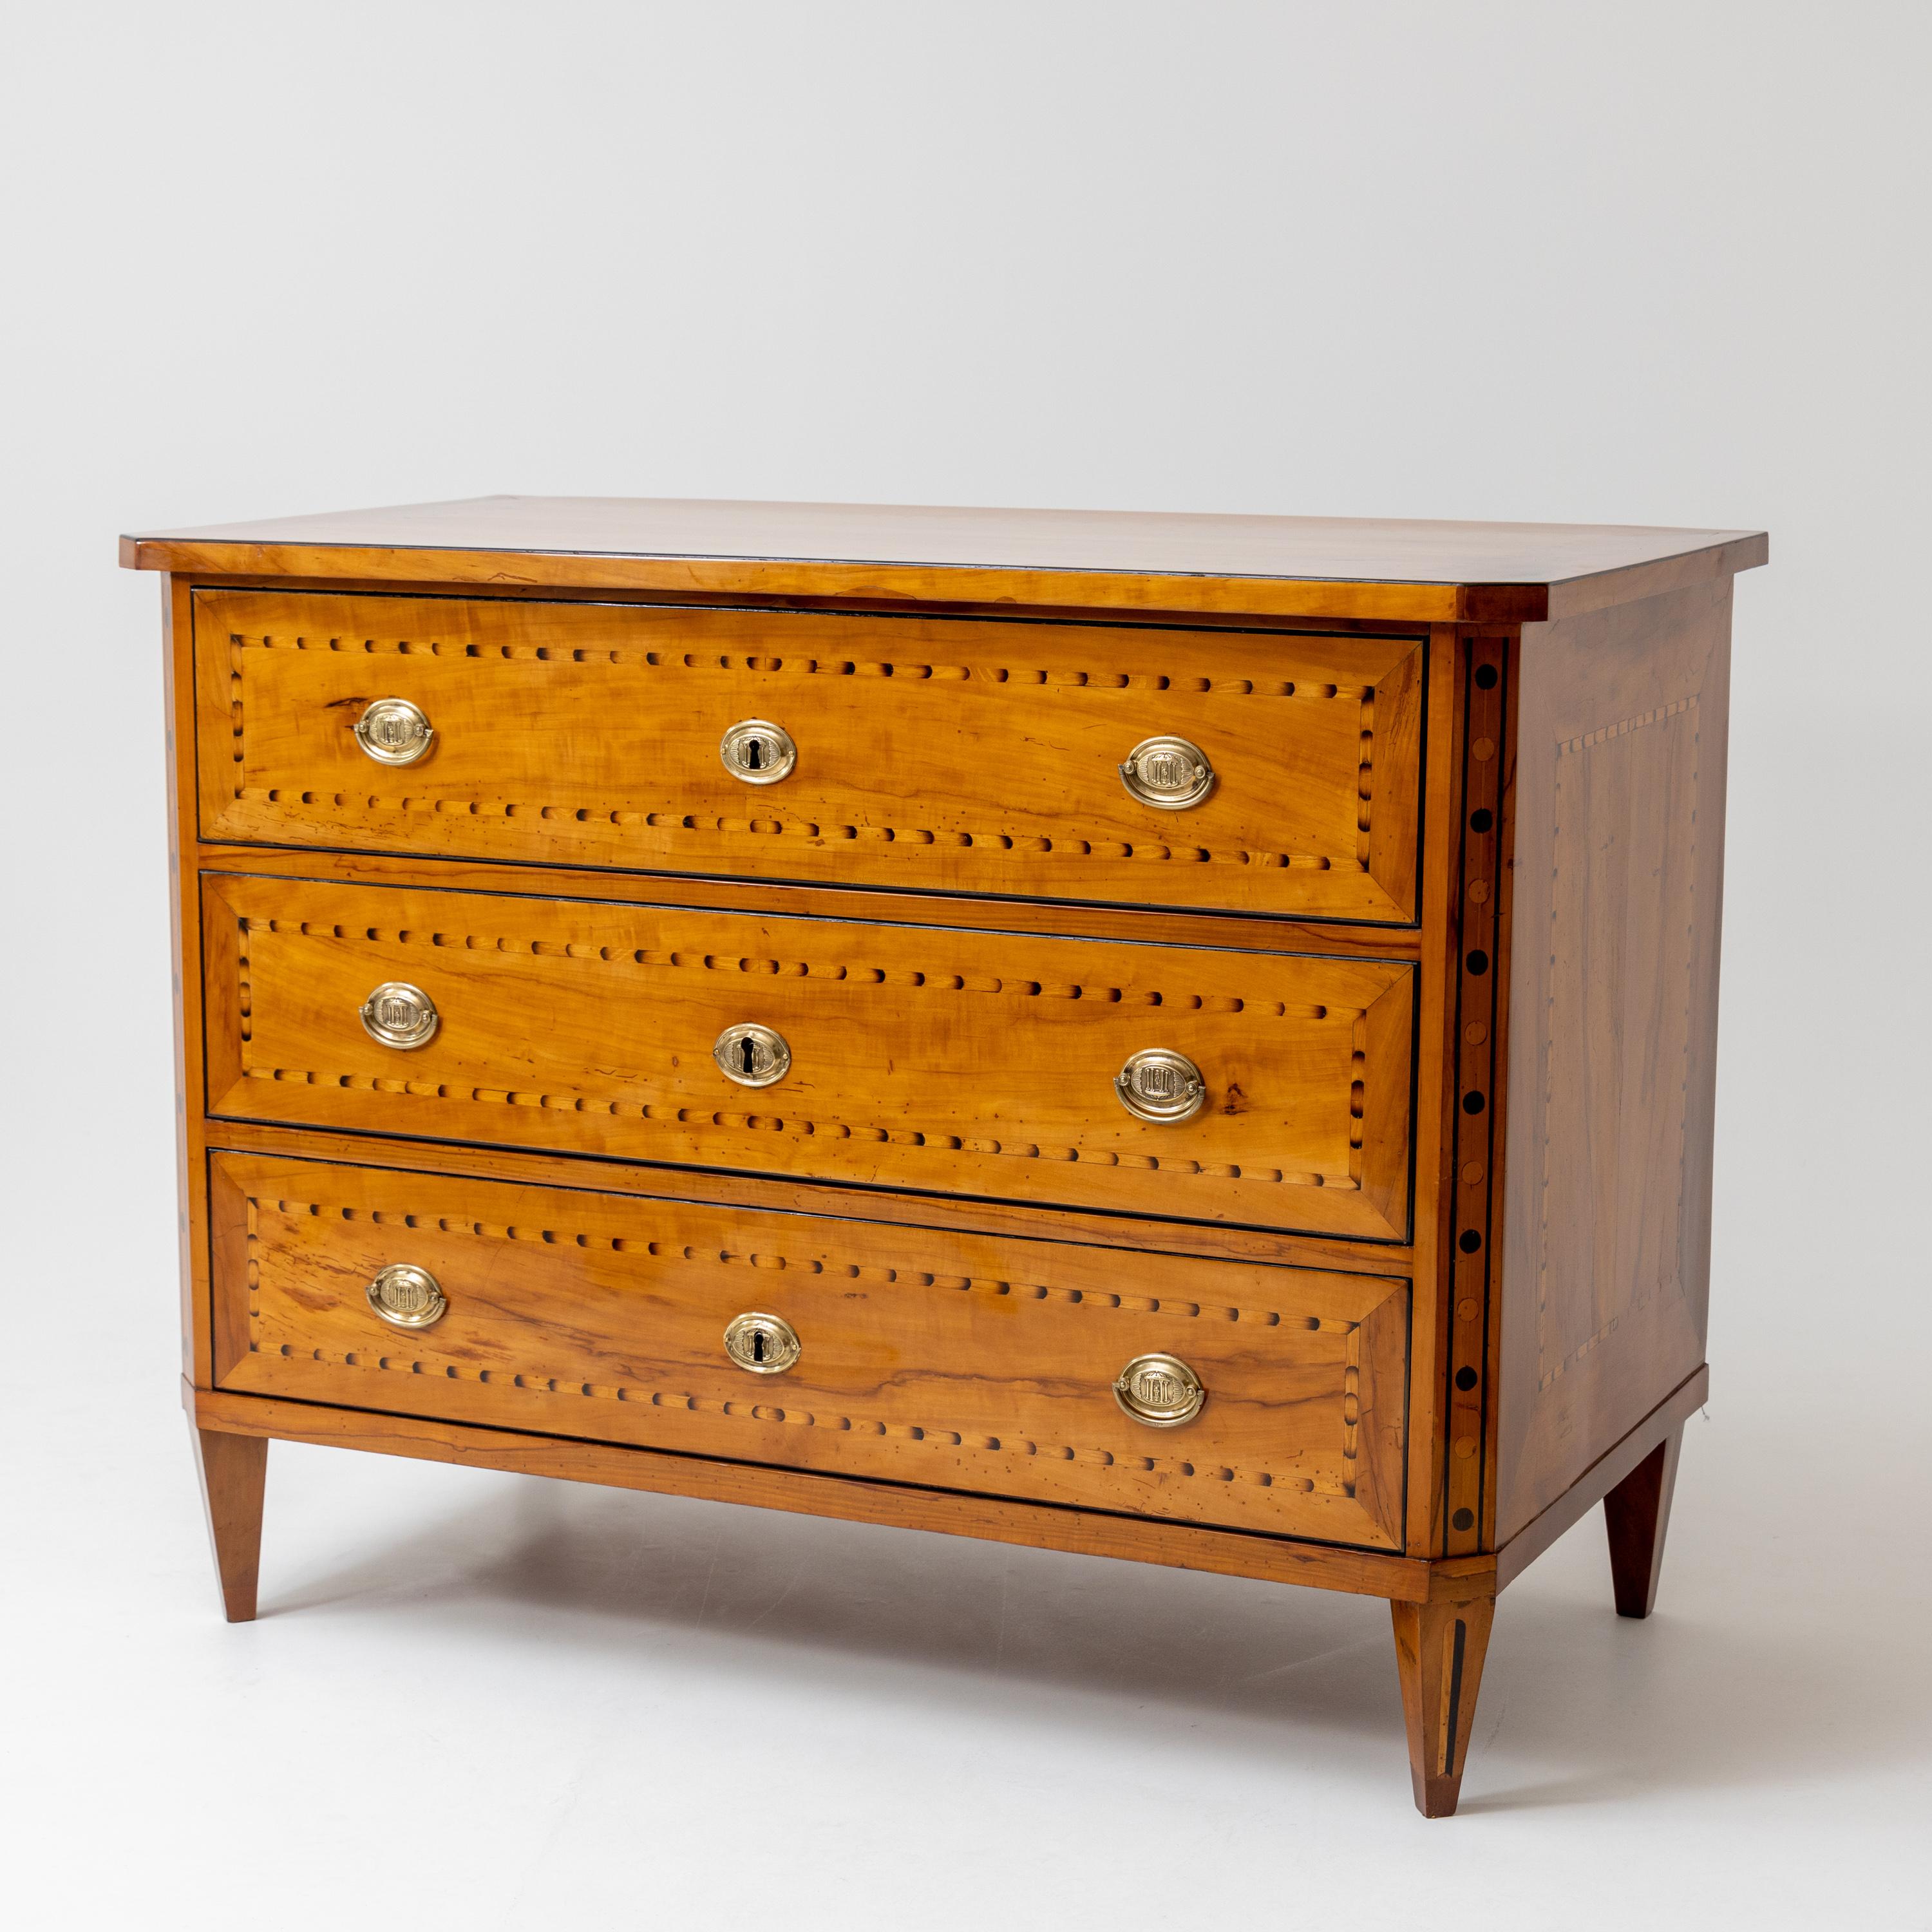 Wood Neoclassical Chest of Drawers, Dresden circa 1800